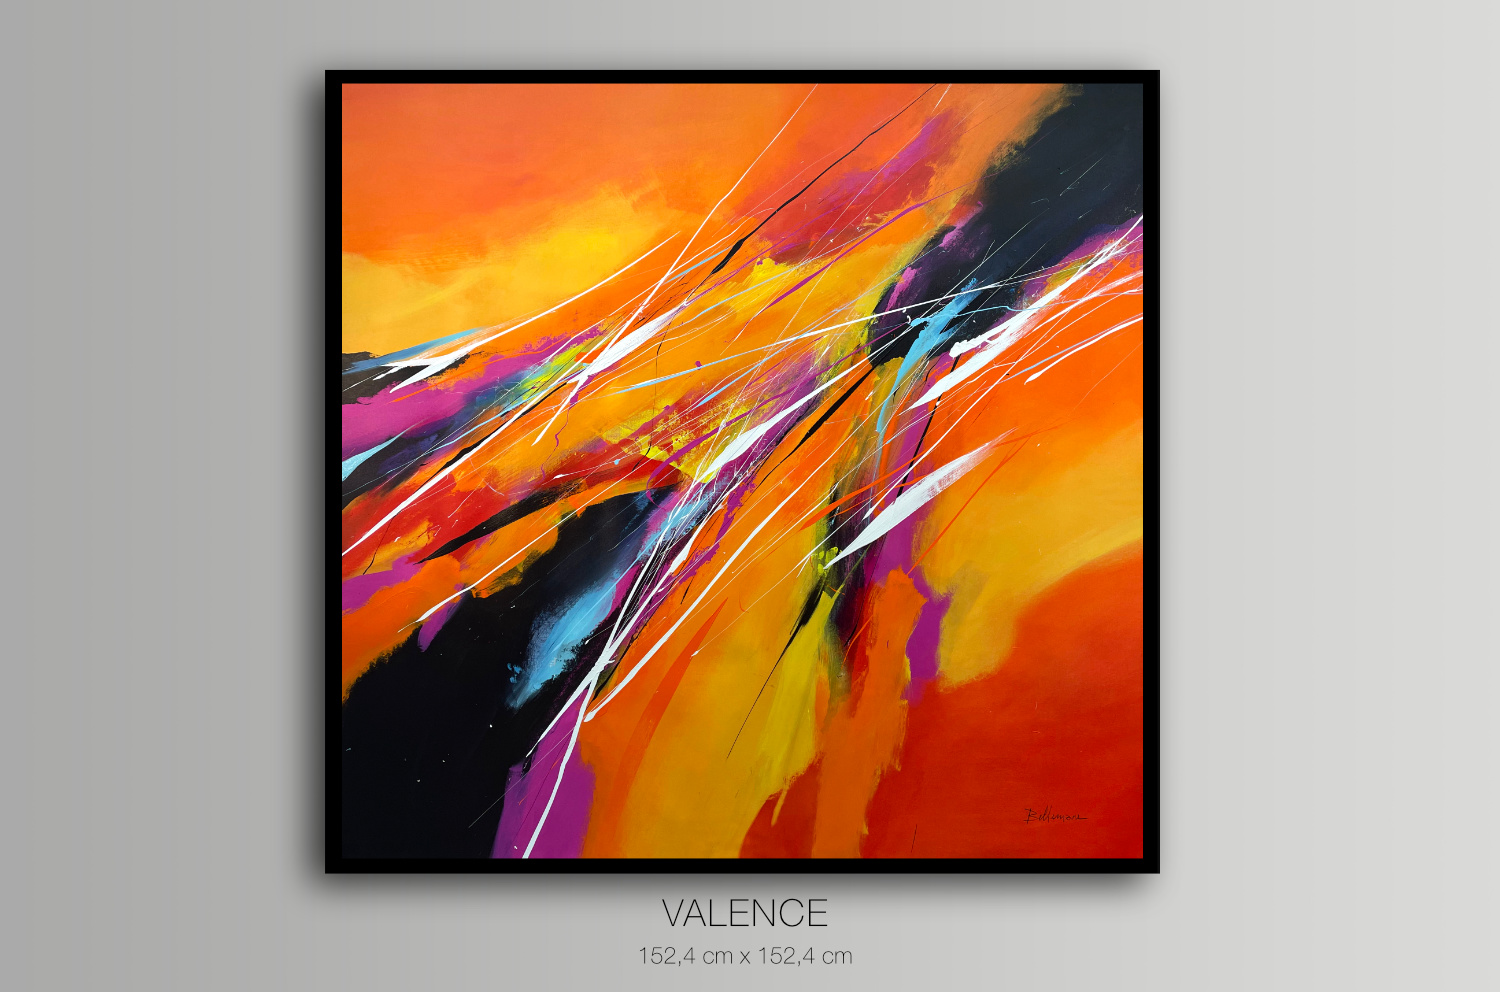 Valence - Featured